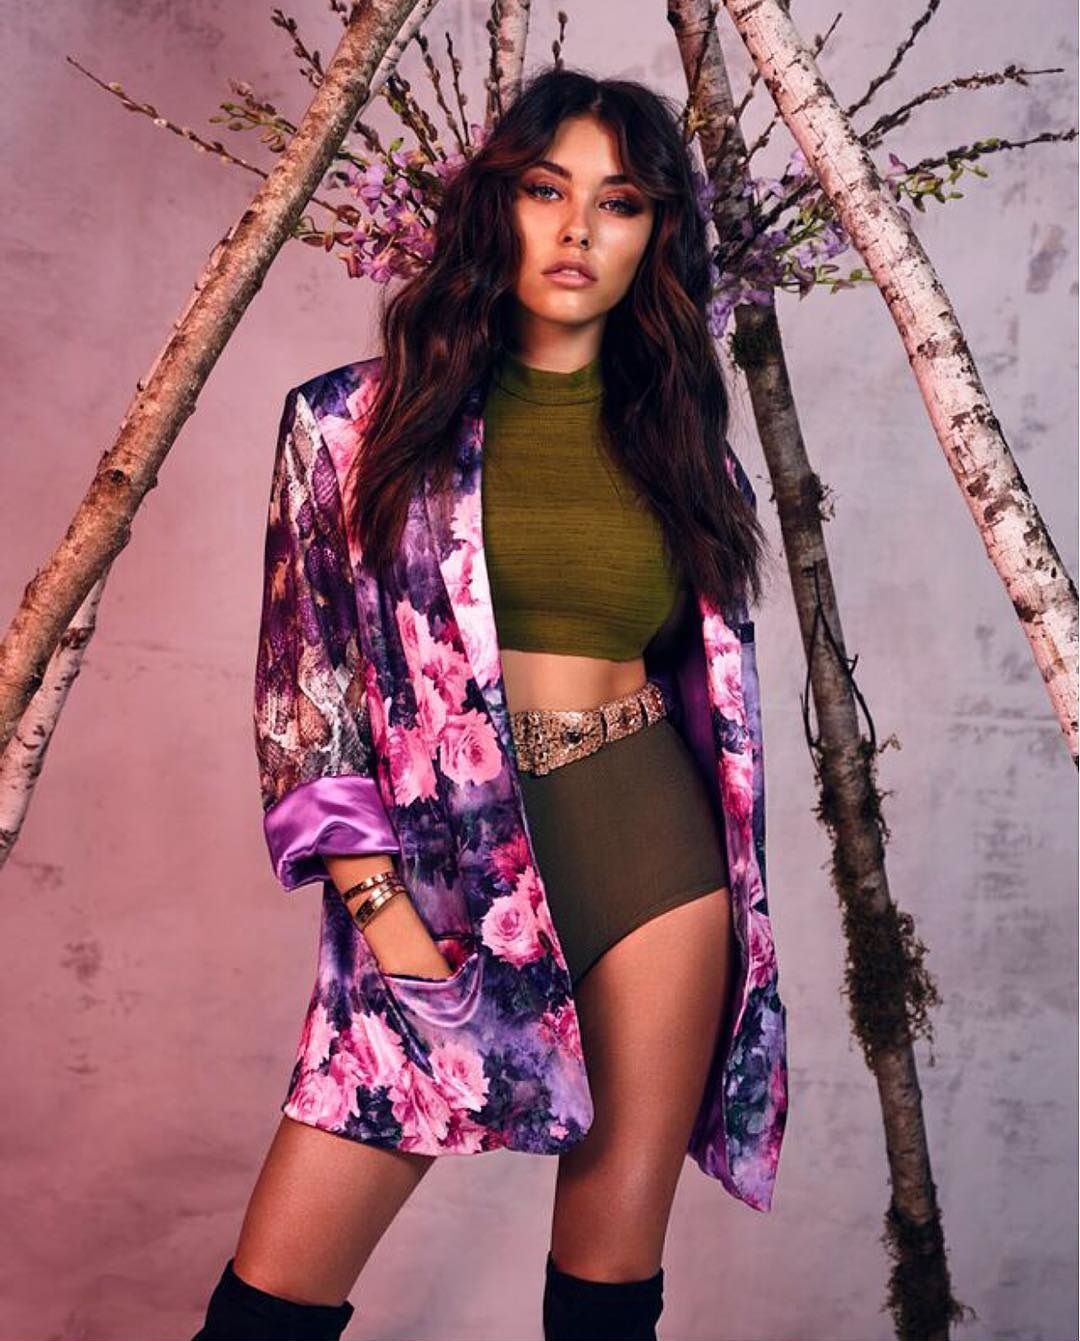 Madison Beer For Factice Magazine Madison Beer Pinterest